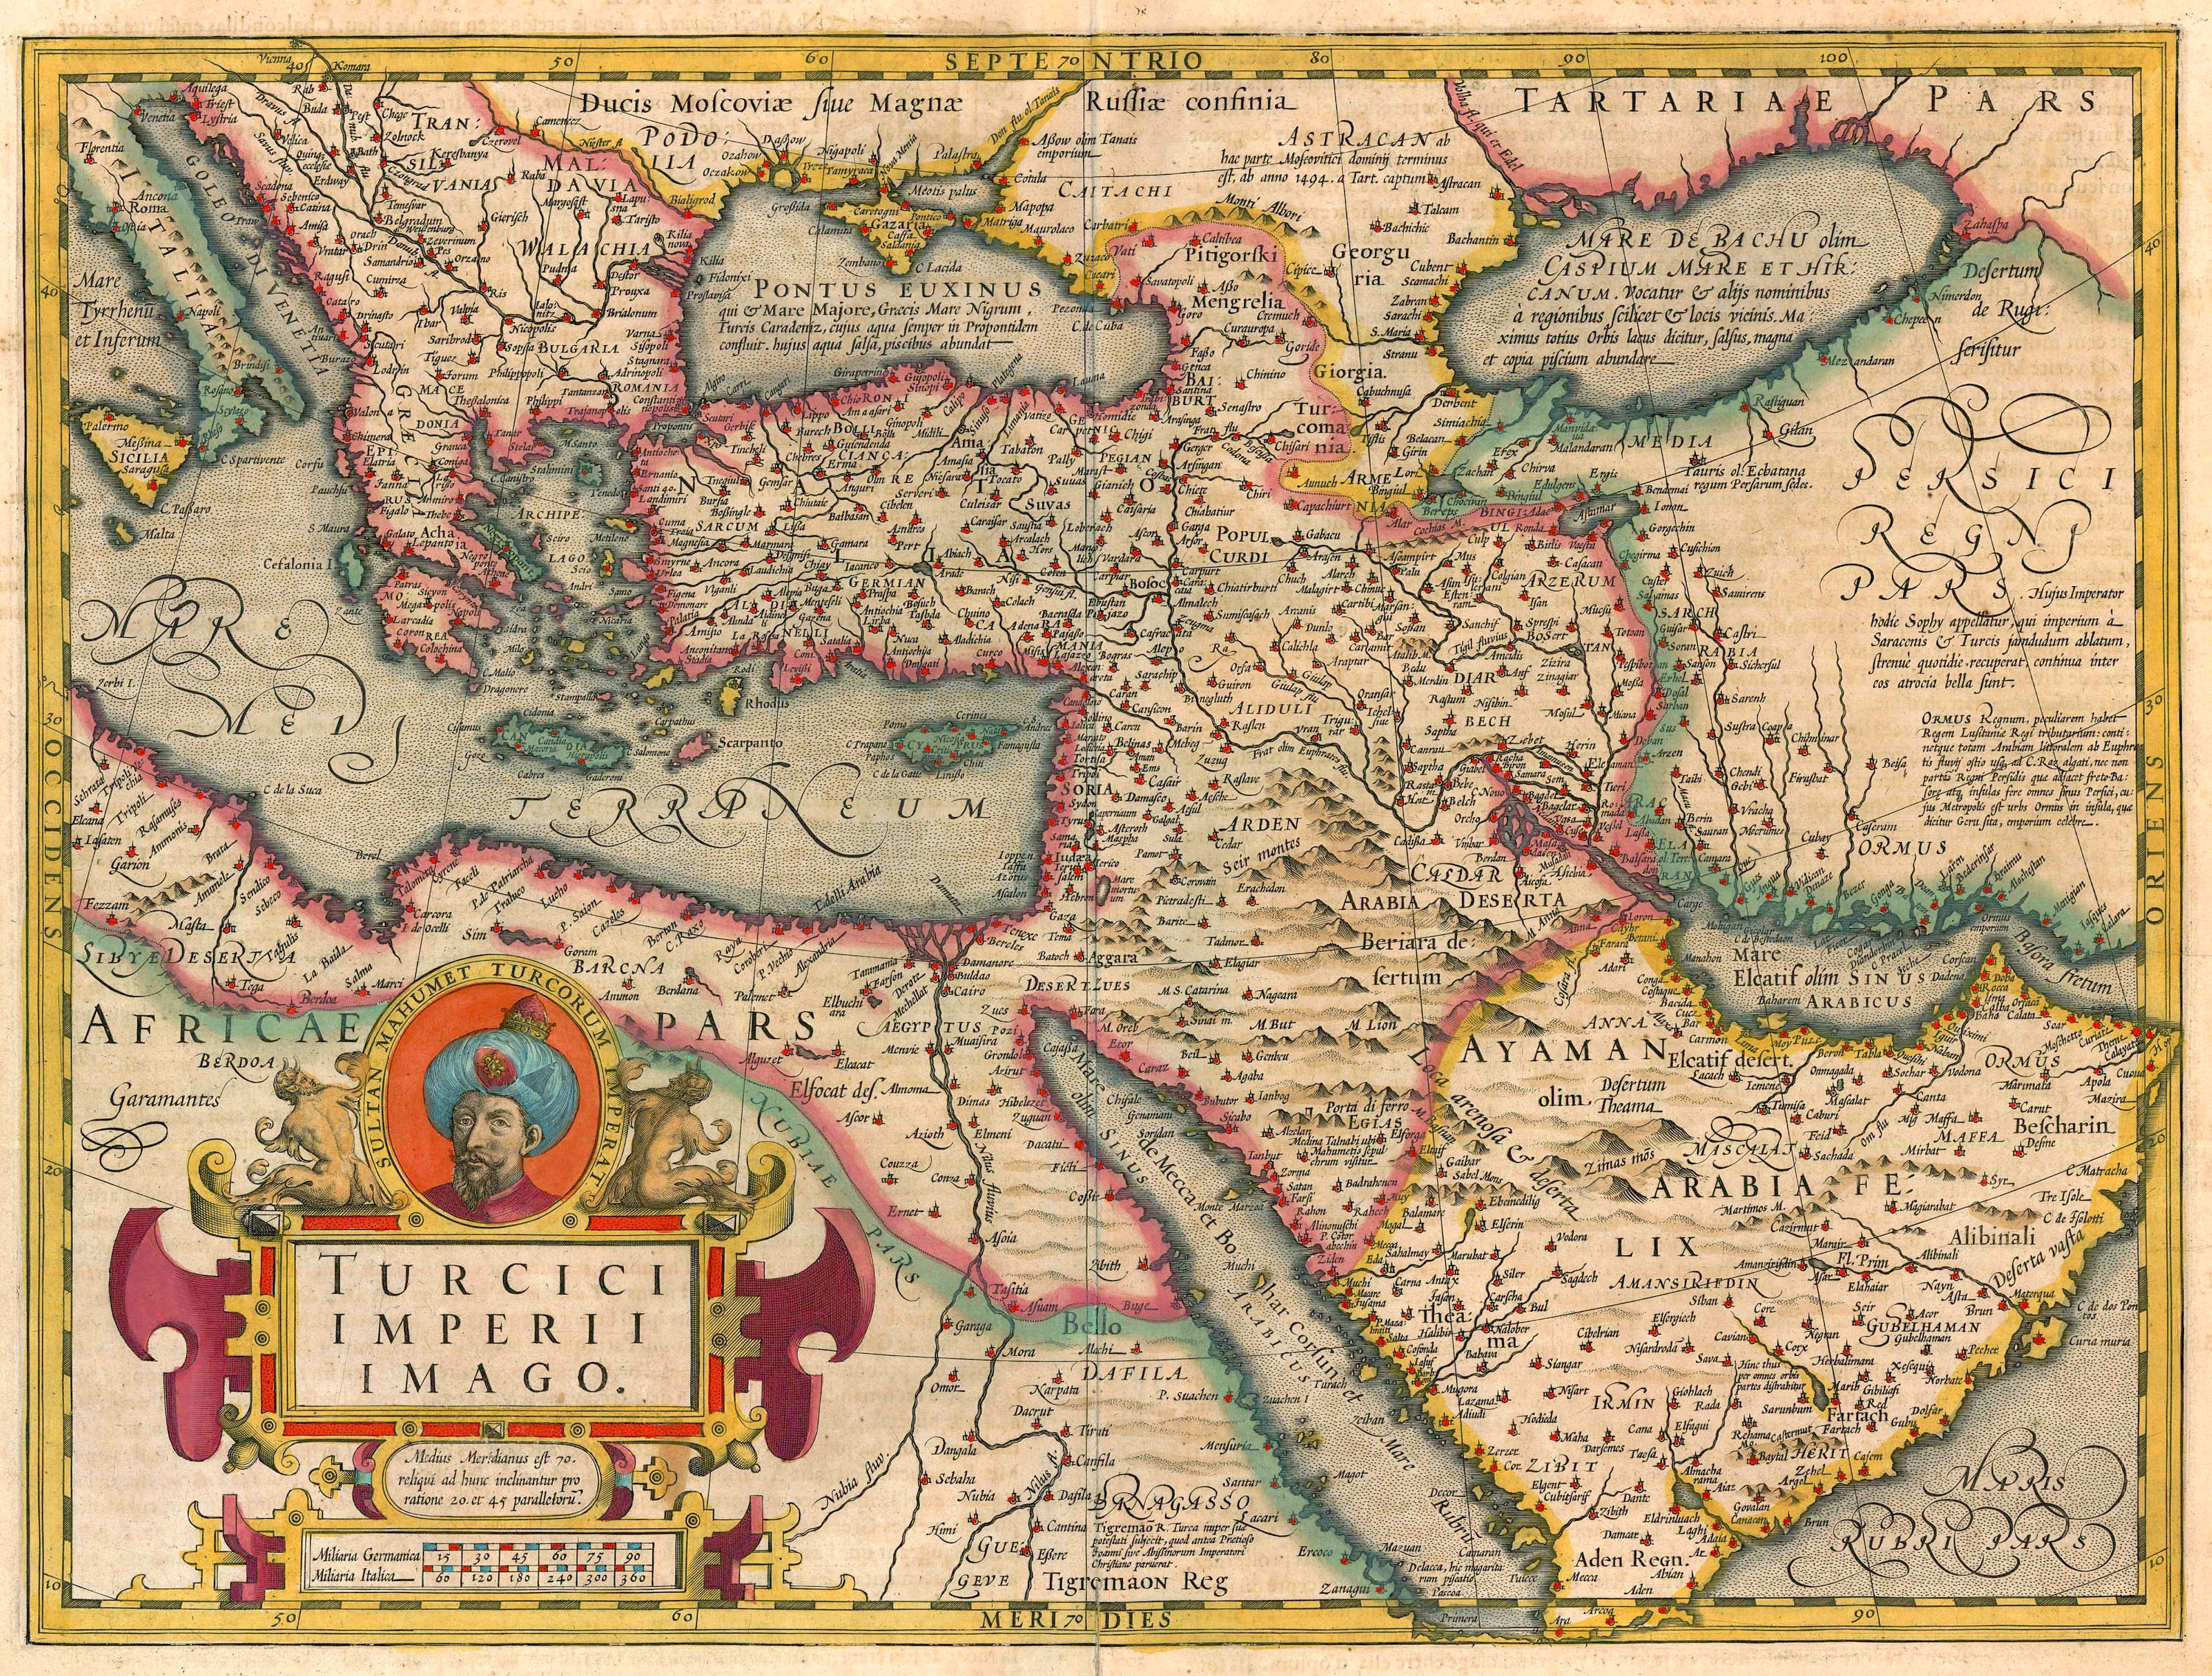 Old Ottoman Empire Map File:antique Map Of The Ottoman Empire By J. Hondius, Cartouche With  Portrait Medallion Of Sultan Mahumet.jpg - Wikimedia Commons